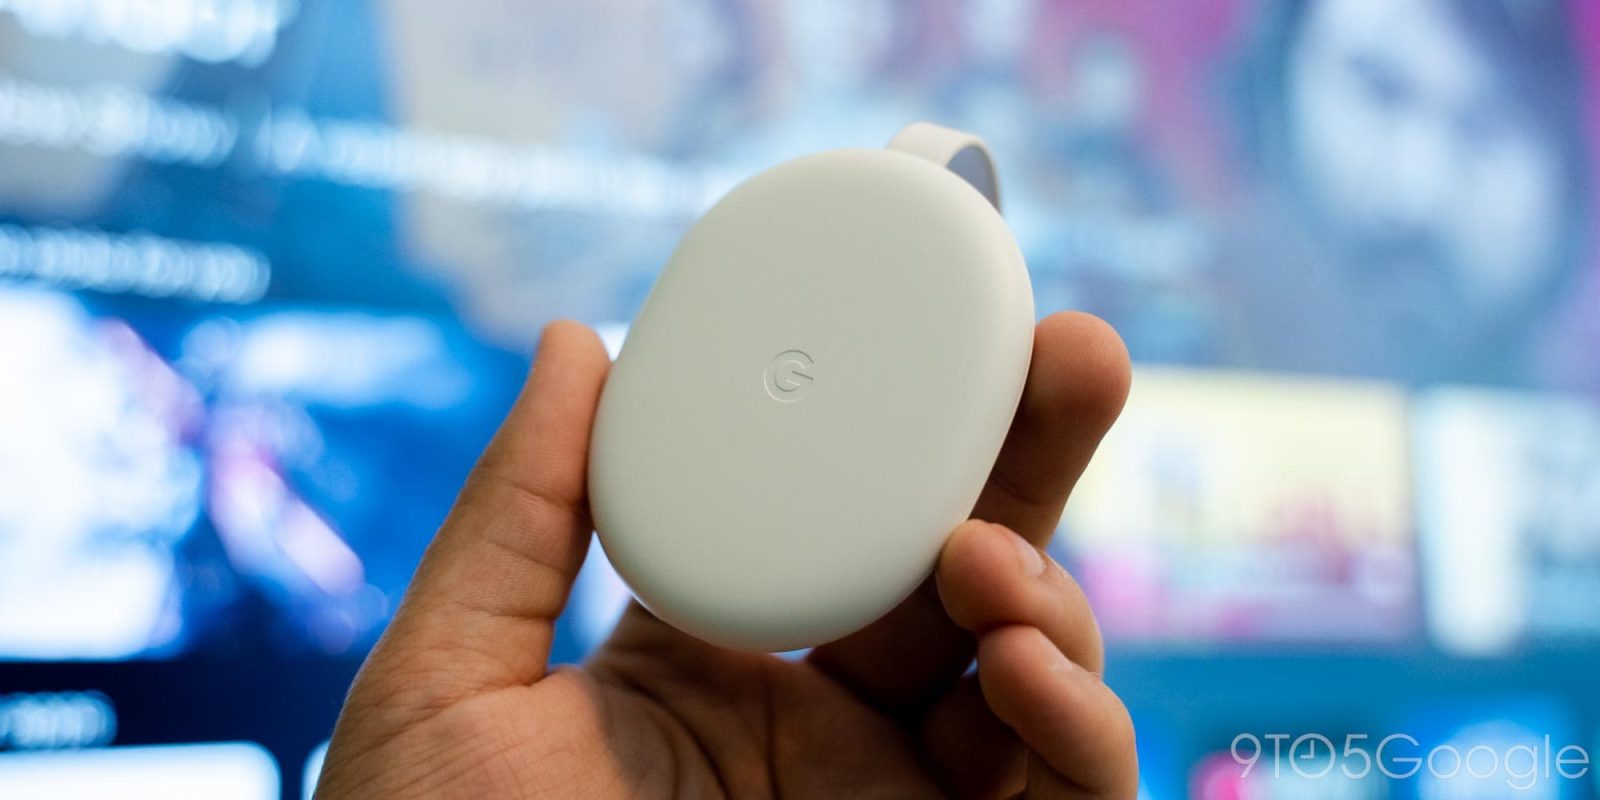 Google now offers a cheaper, 1080p version of the Chromecast with Google TV